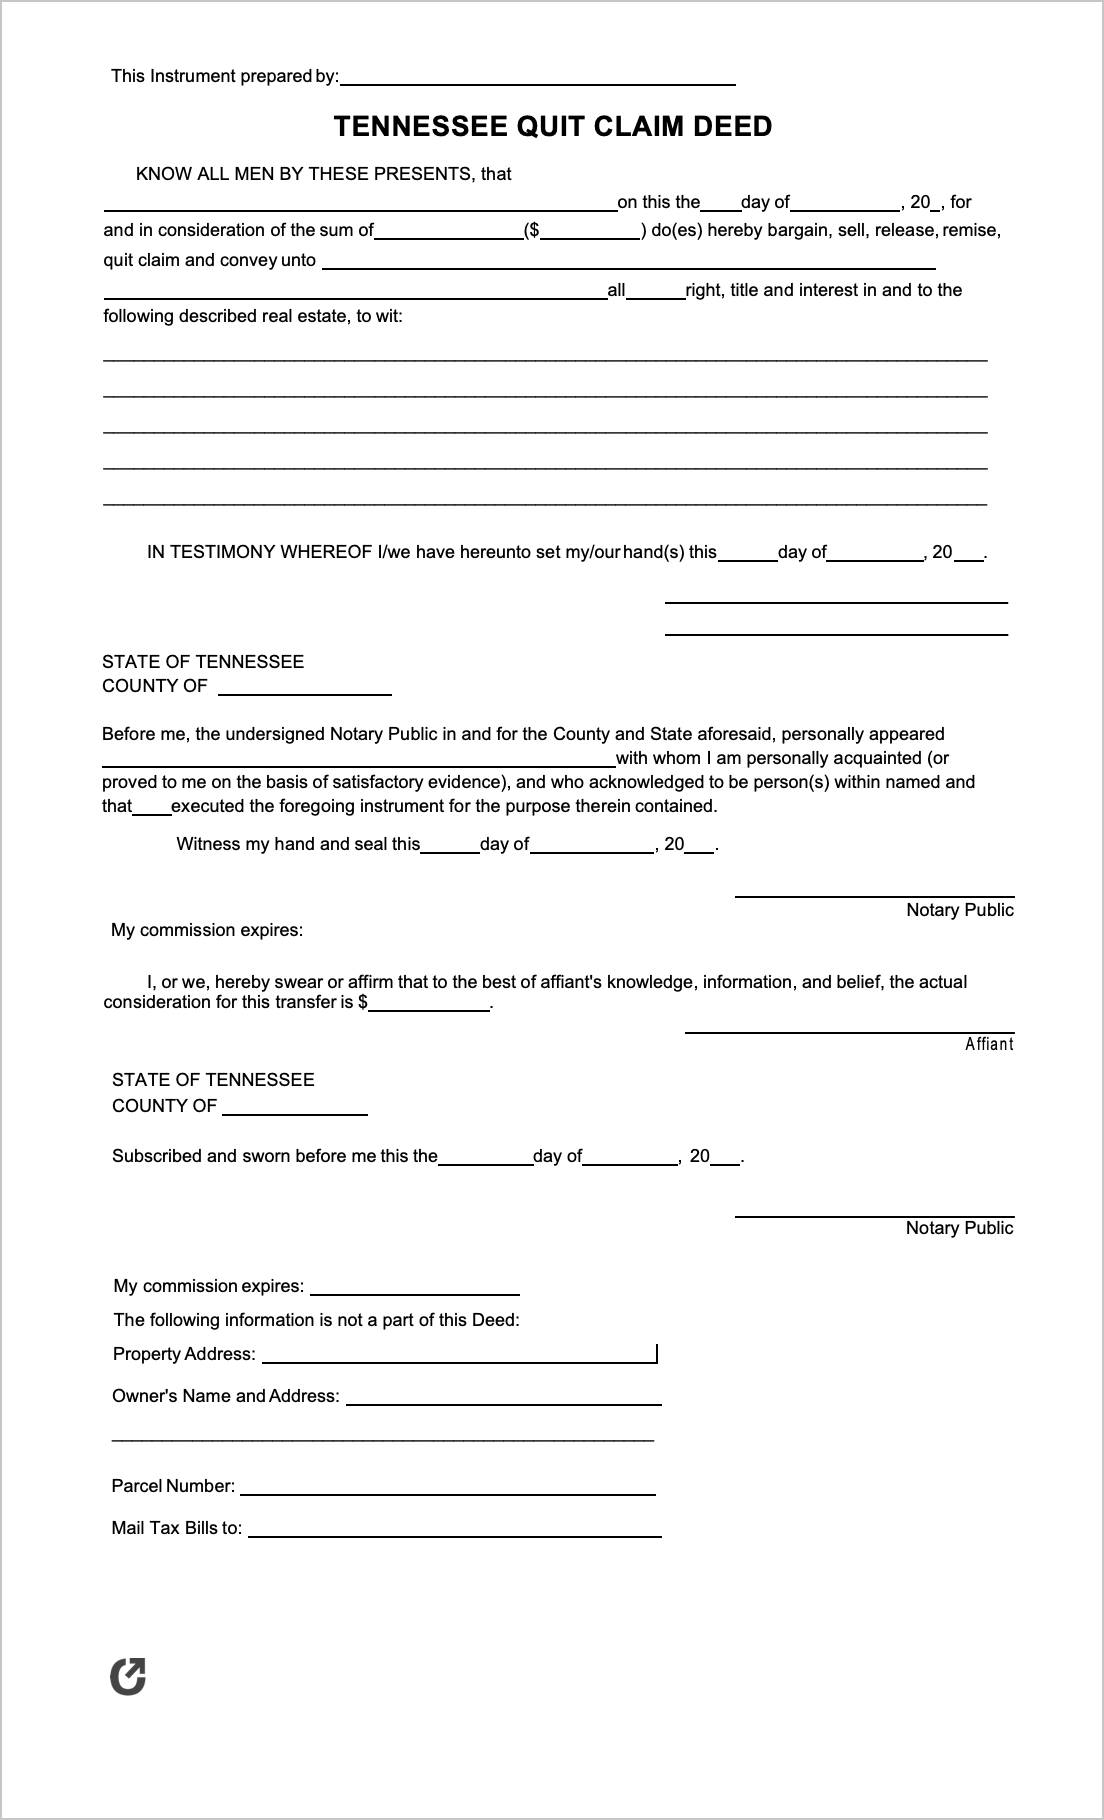 free-tennessee-quit-claim-deed-form-pdf-word